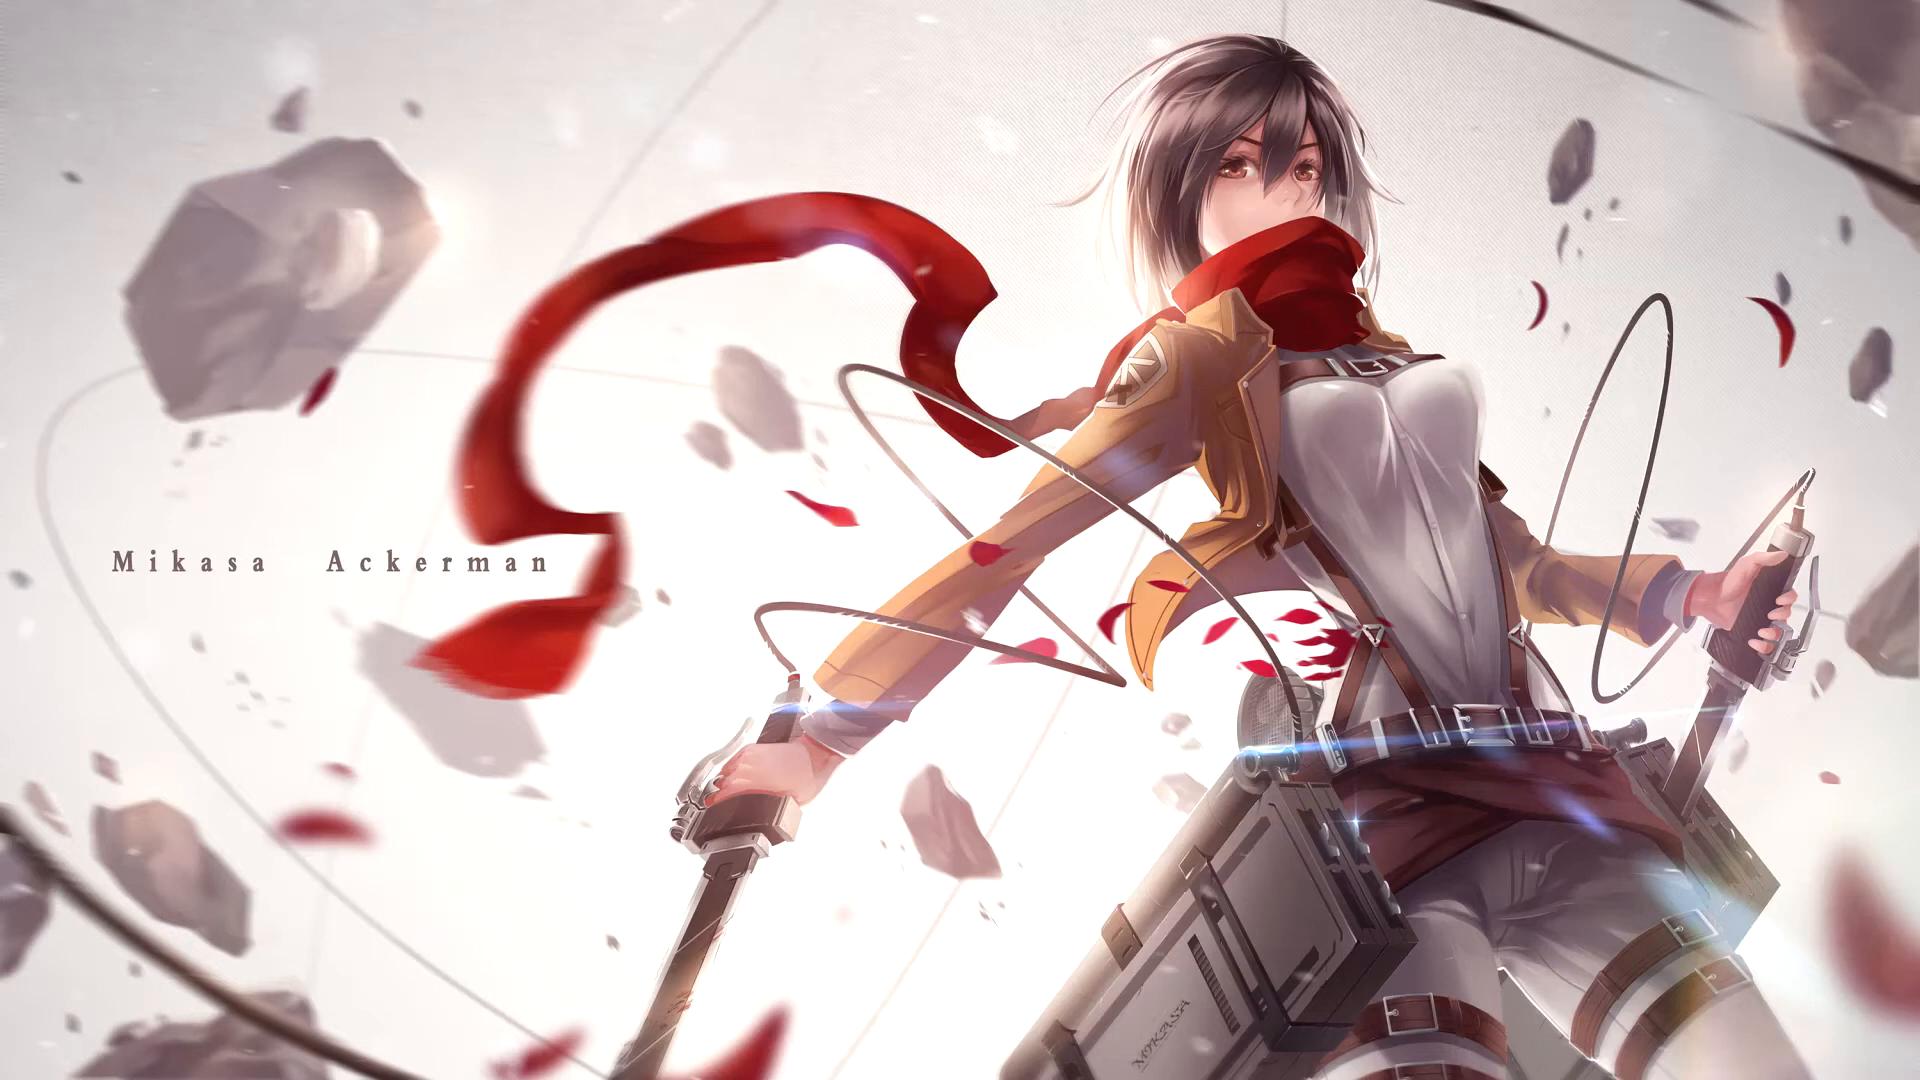 800+ Mikasa Ackerman HD Wallpapers and Backgrounds